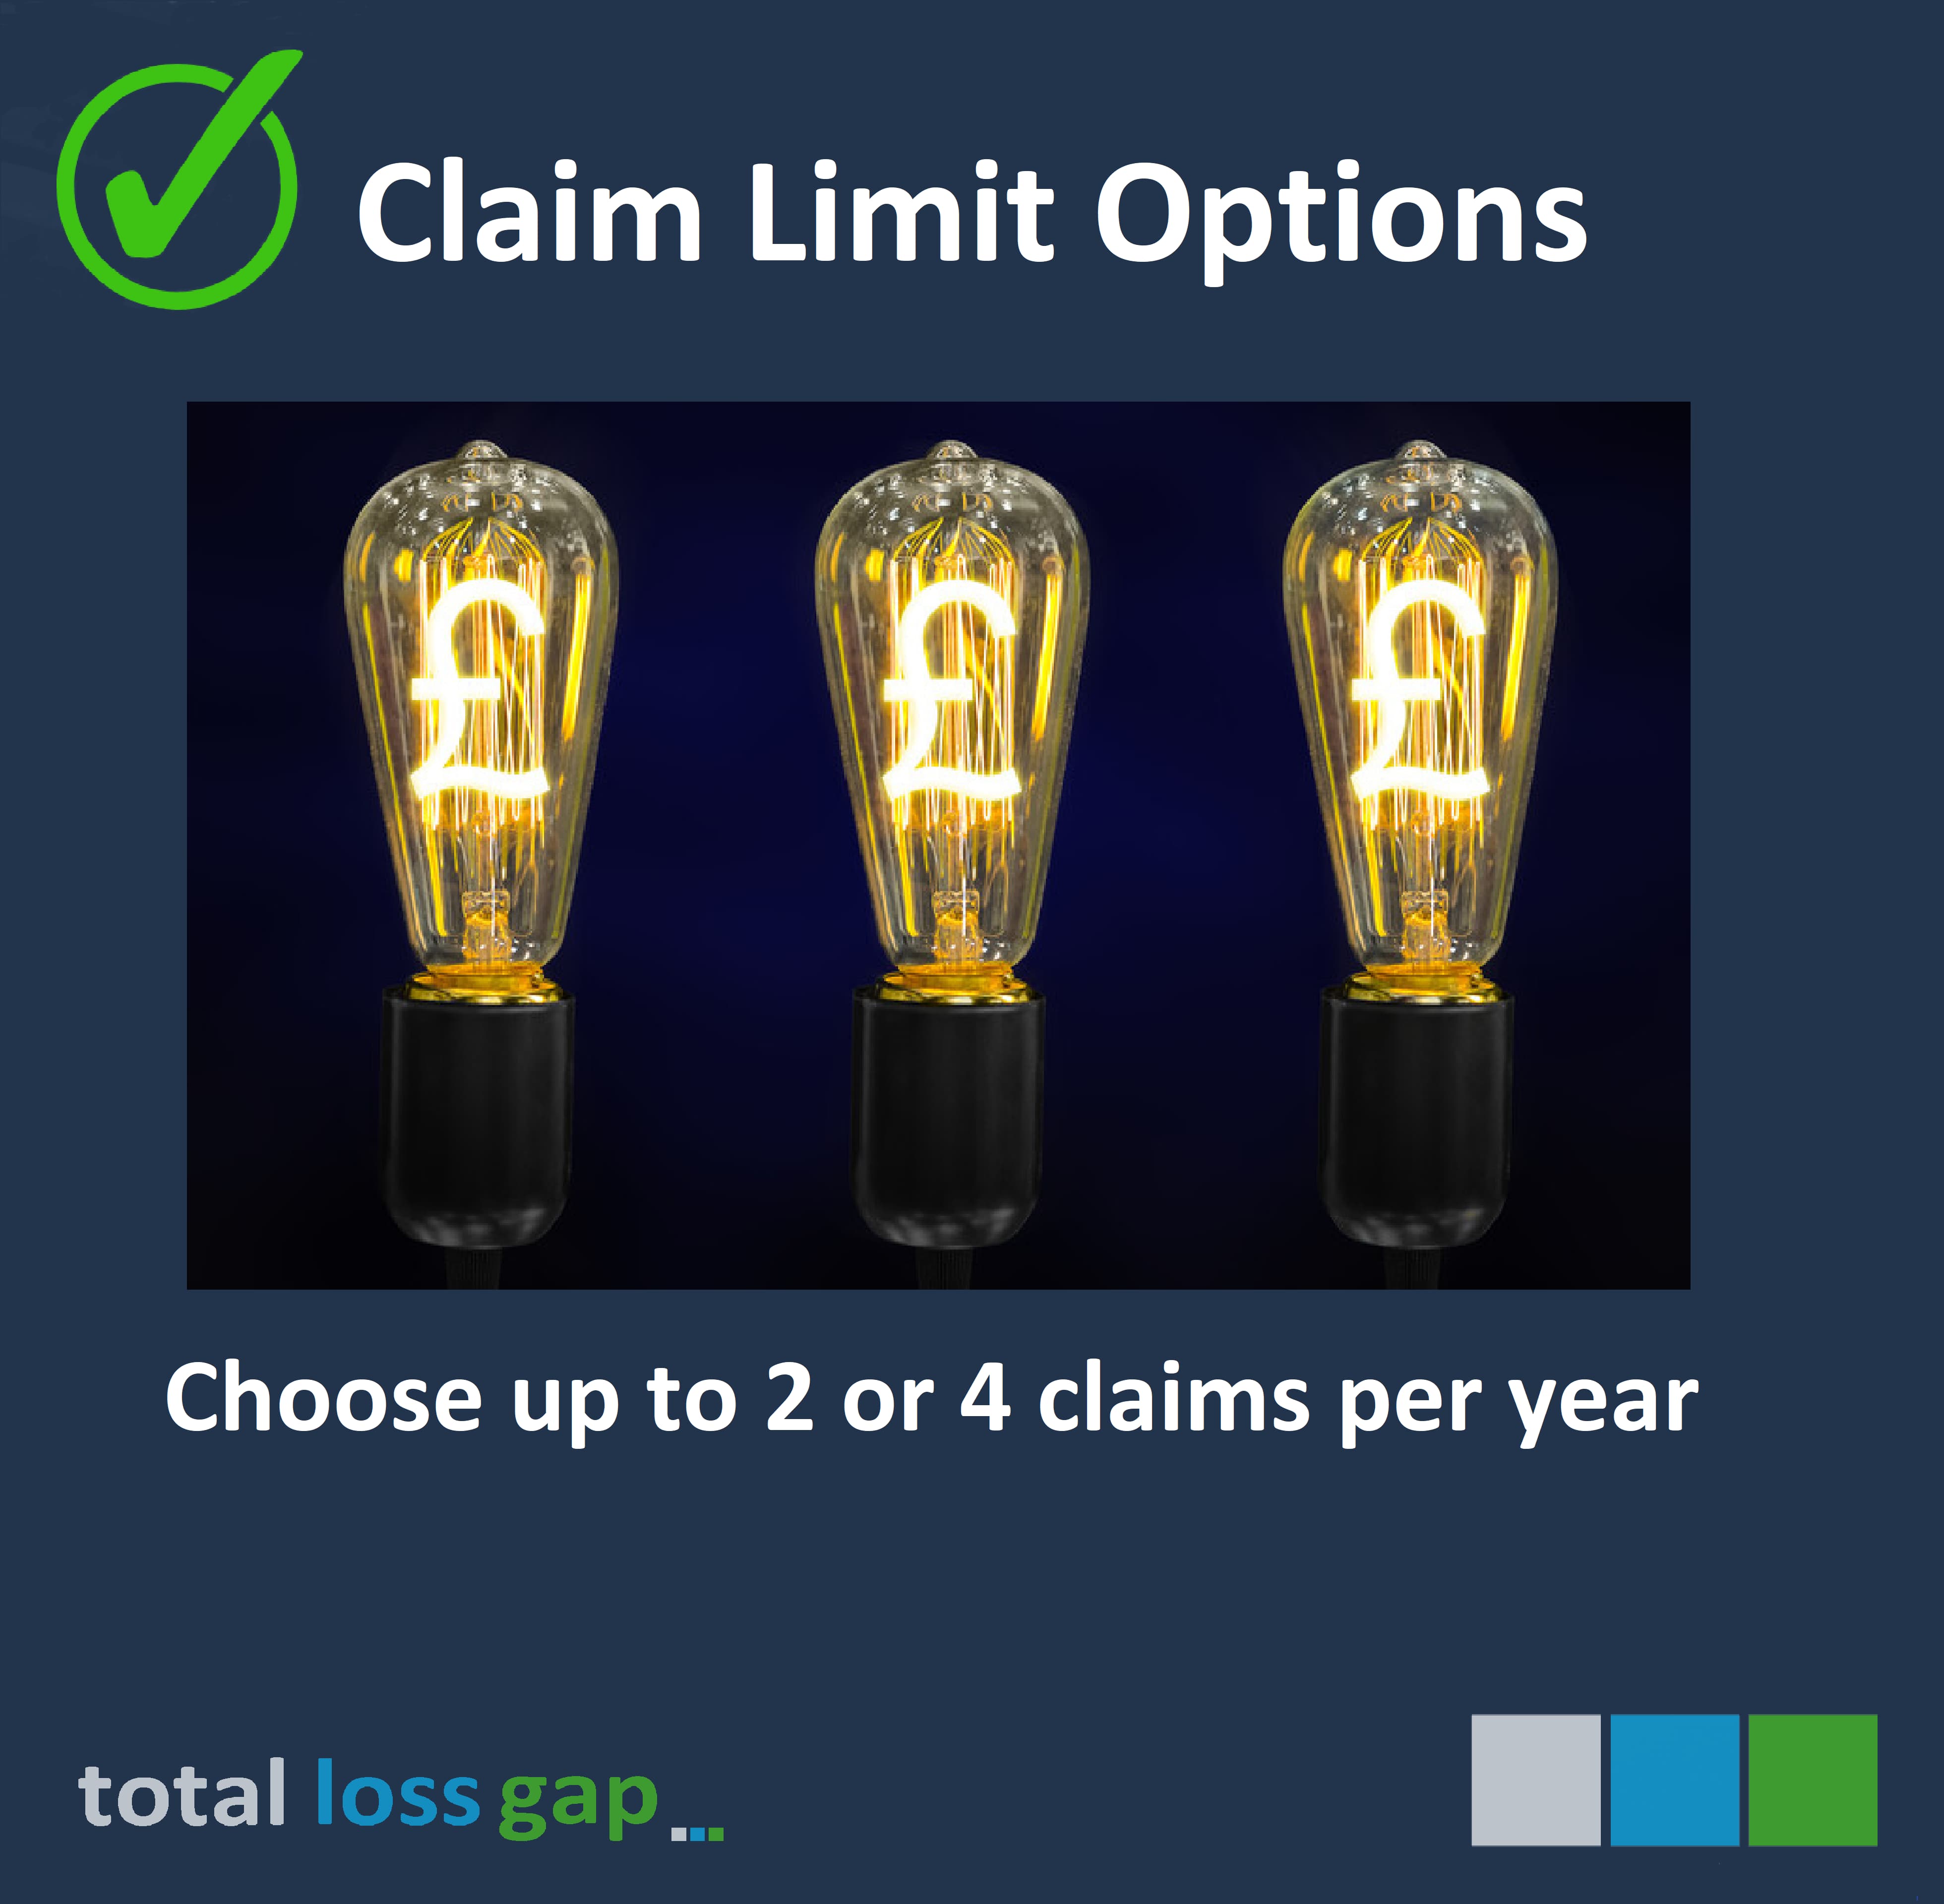 Choice of 2 or 4 claims per year